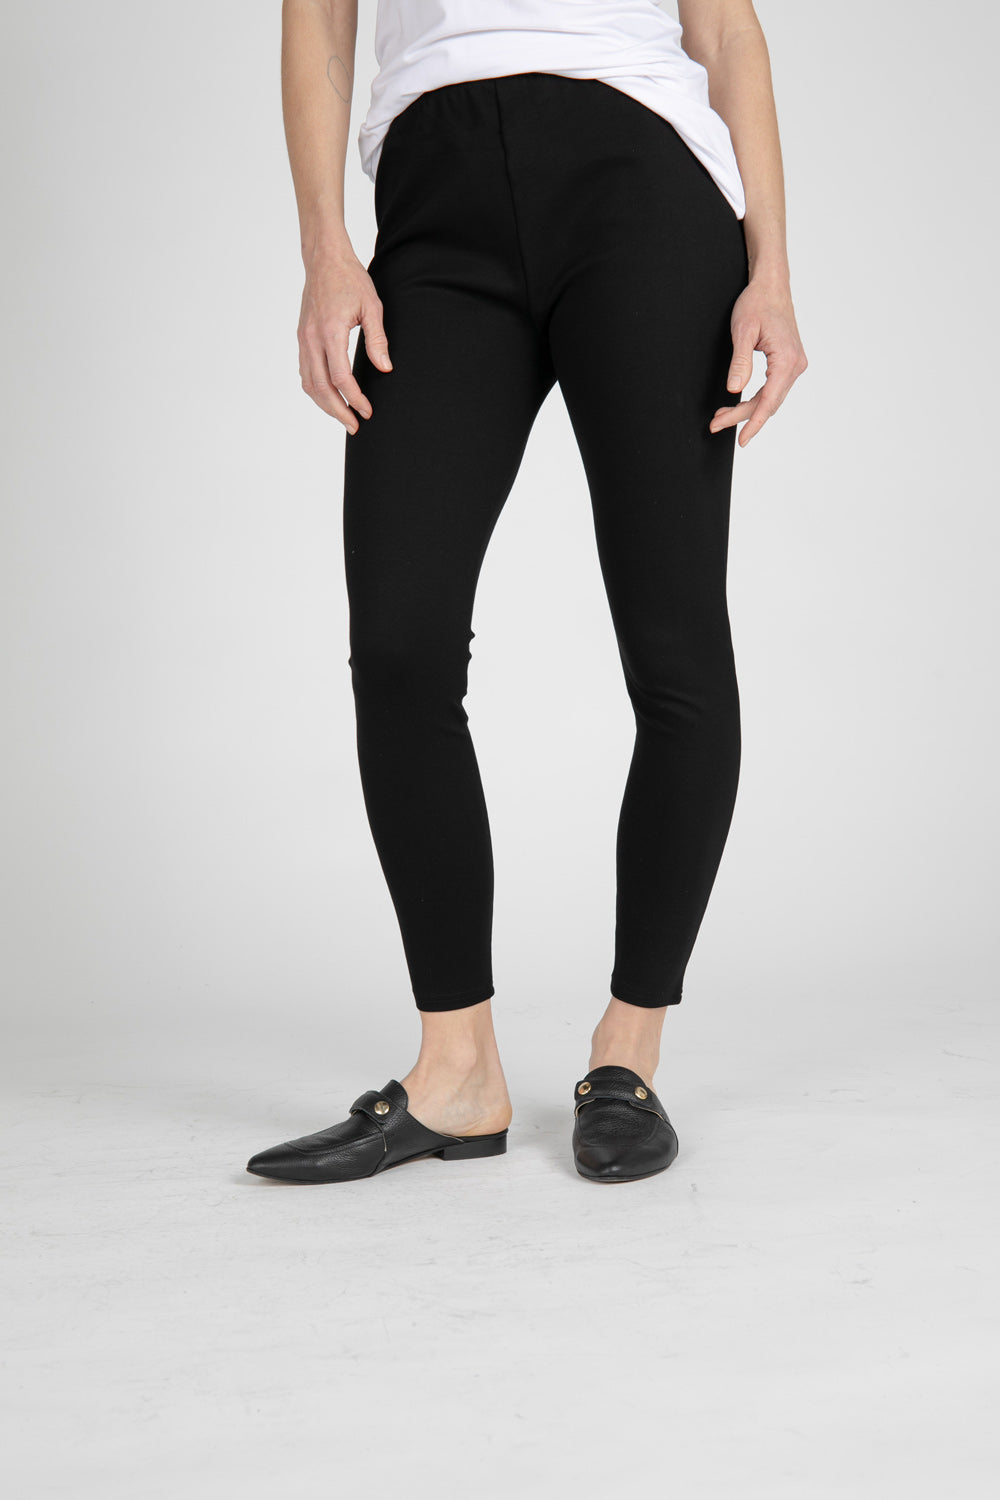 The All-Mighty Basic Leggings